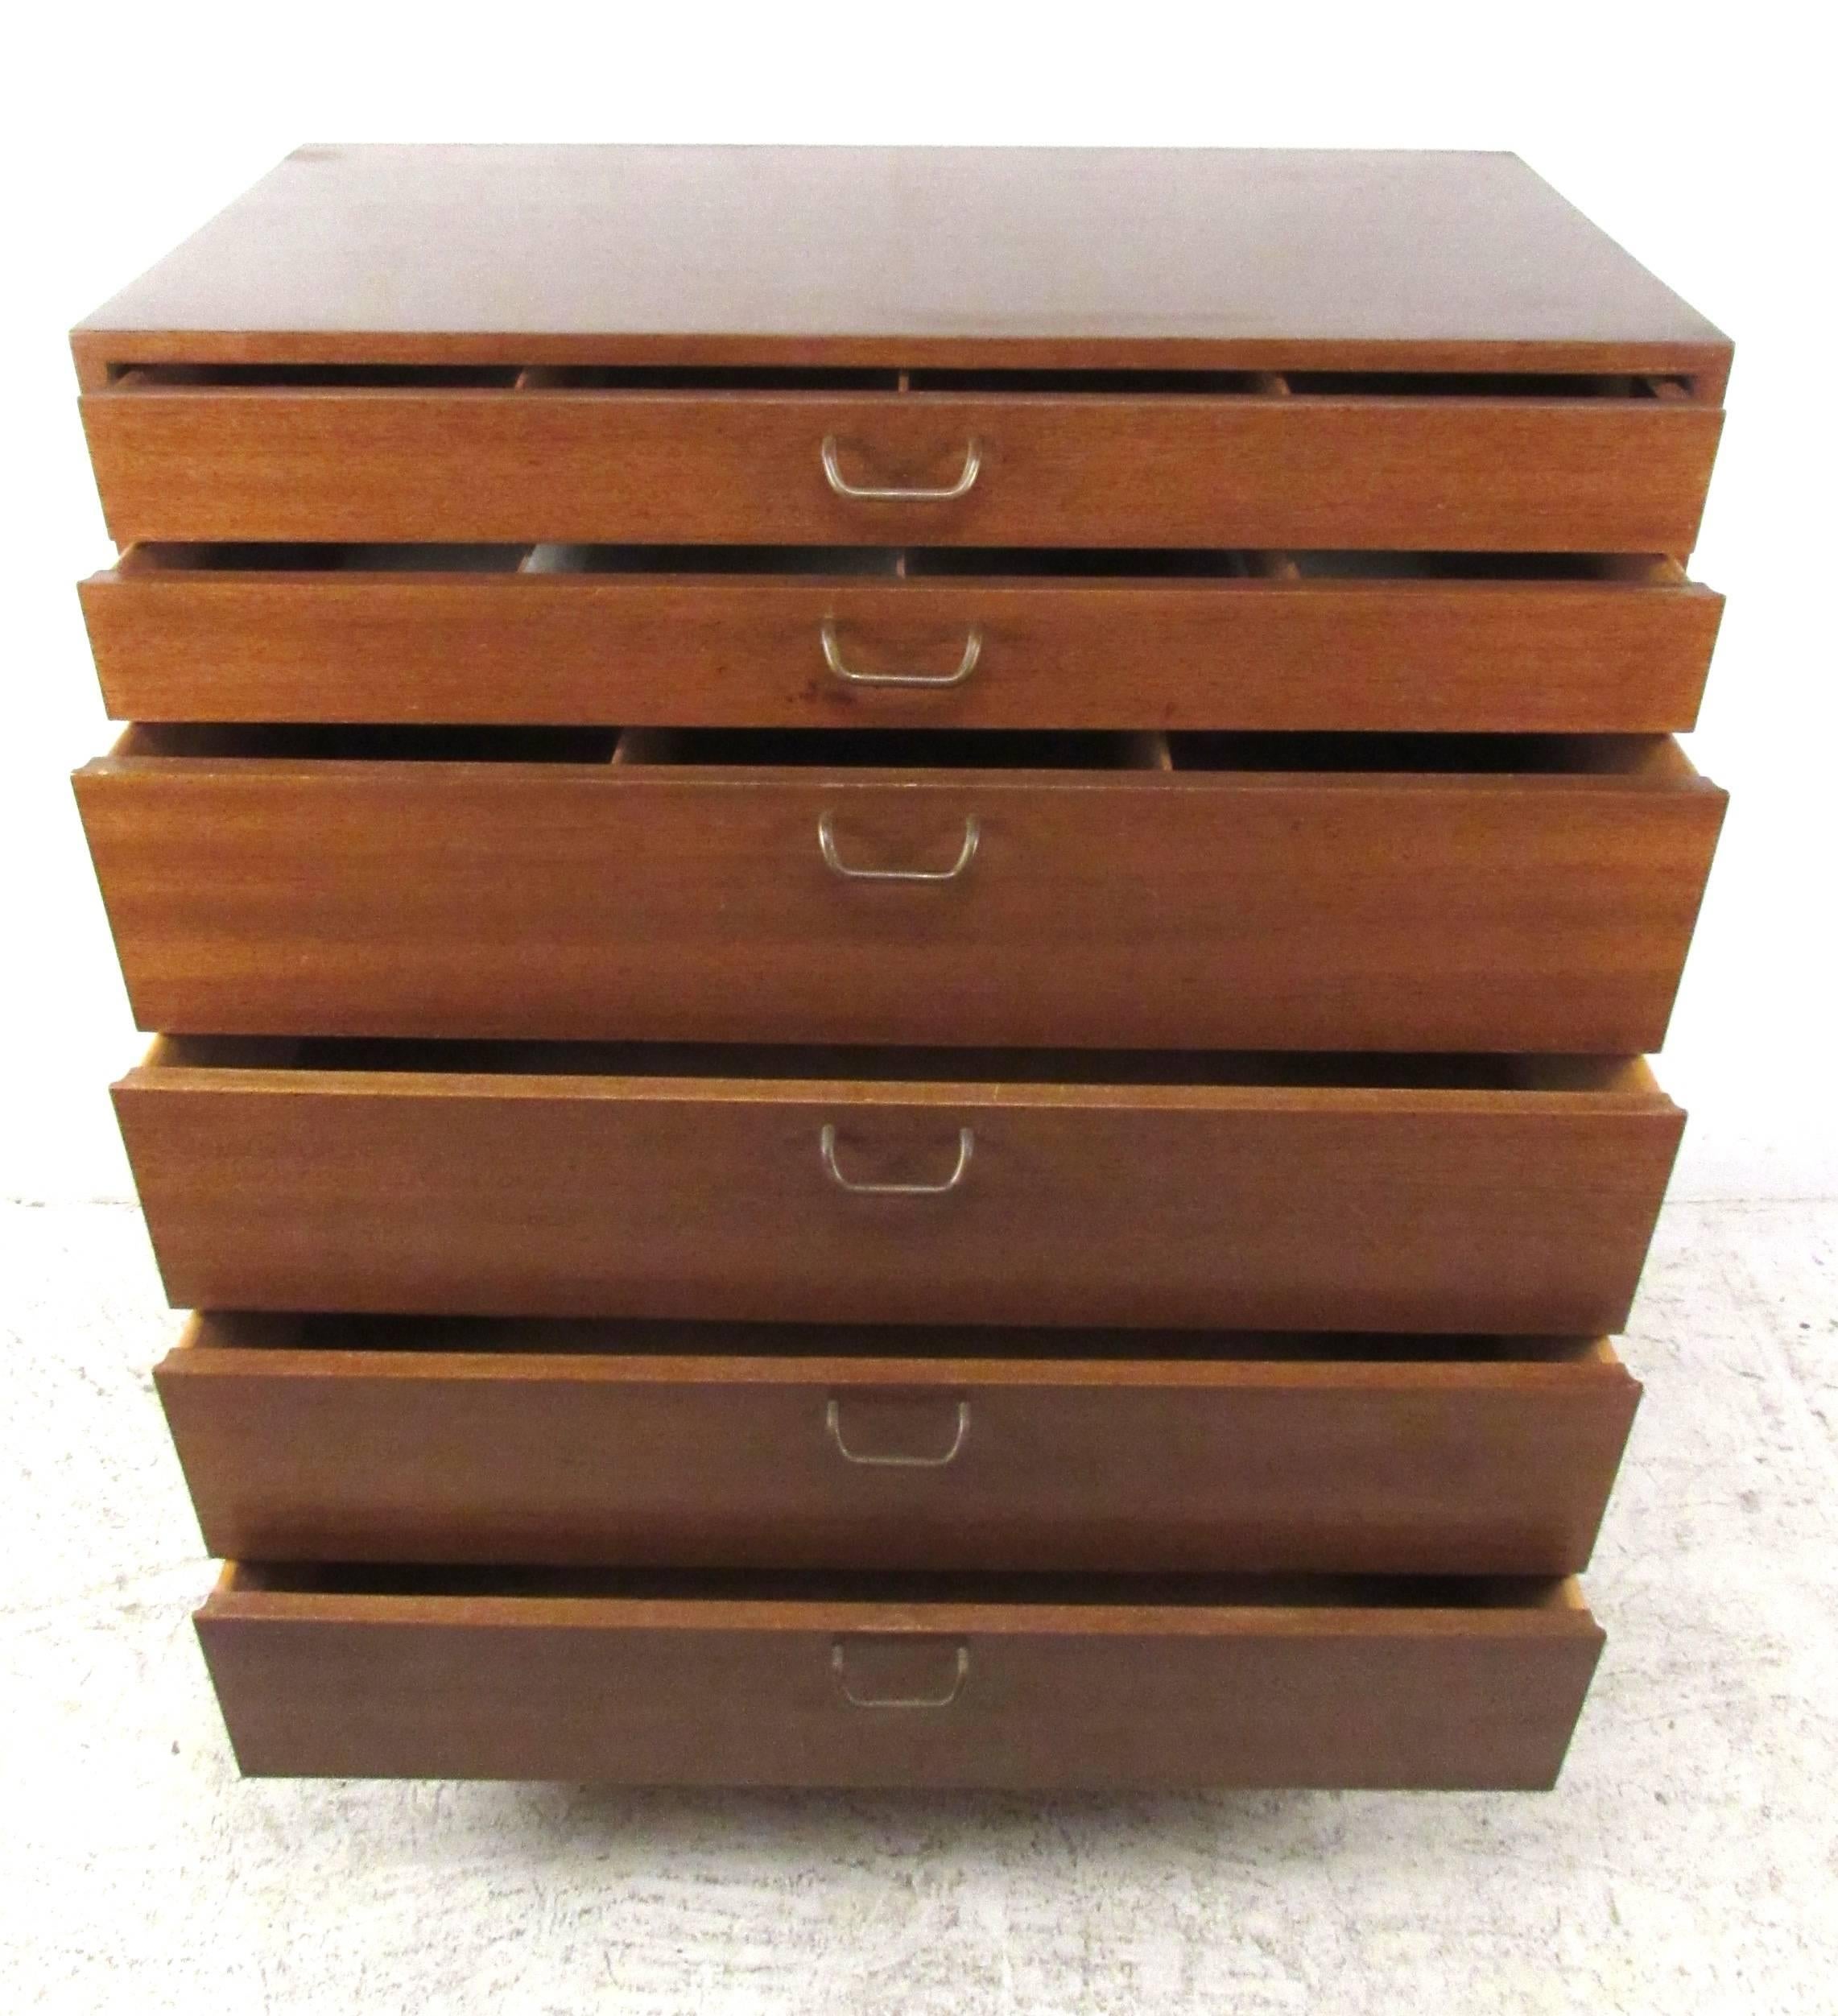 Mahogany six-drawer dresser with brass pulls and two partitioned drawers. Perfect mid-century modern highboy dresser for bedroom storage. Iconic Harvey Probber style drawer pulls, original label in drawer  Please confirm item location (NY or NJ)